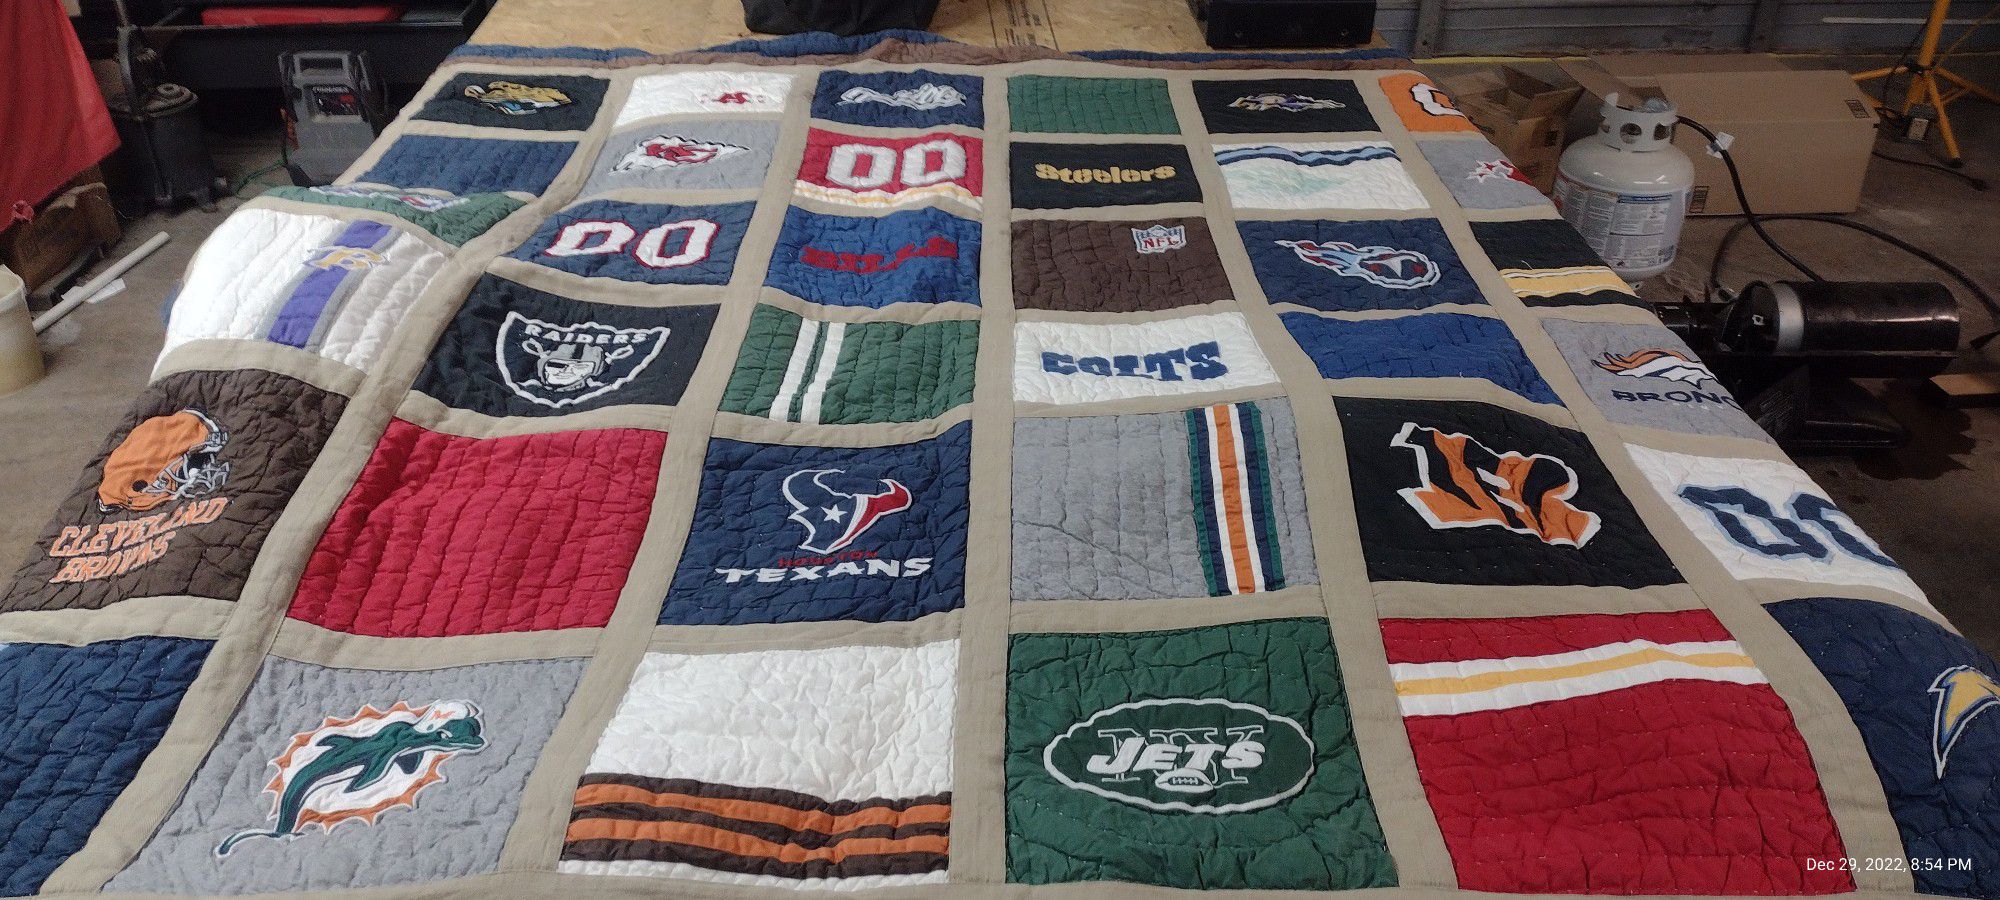 NFL Quilt Each Design Follows The Pattern With The Embroidery Comes With Two Shams